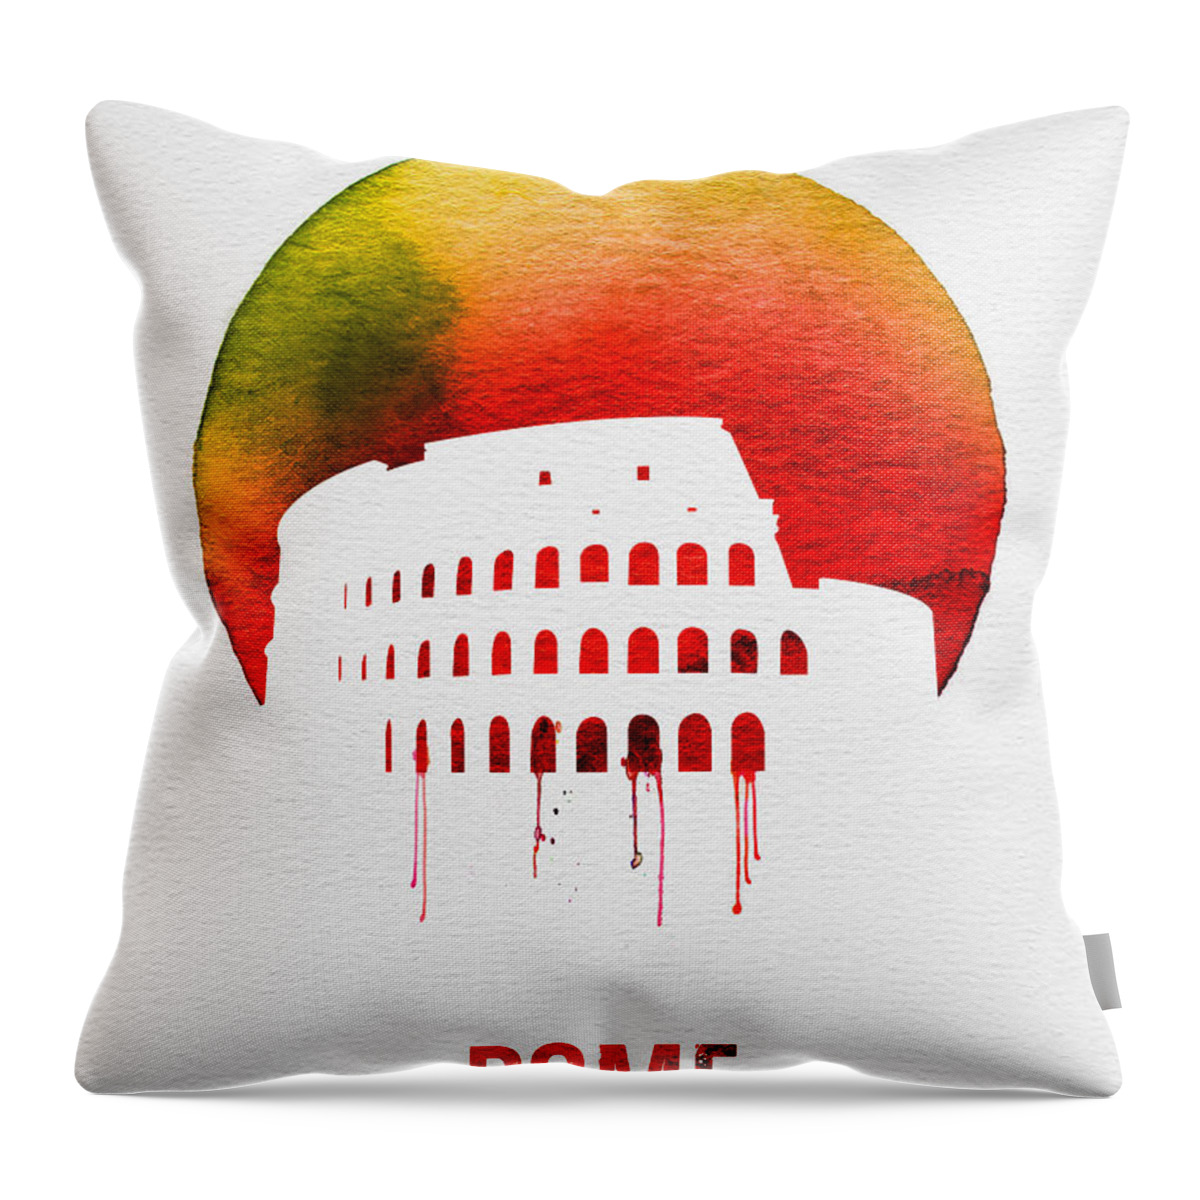 Rome Throw Pillow featuring the painting Rome Landmark Red by Naxart Studio